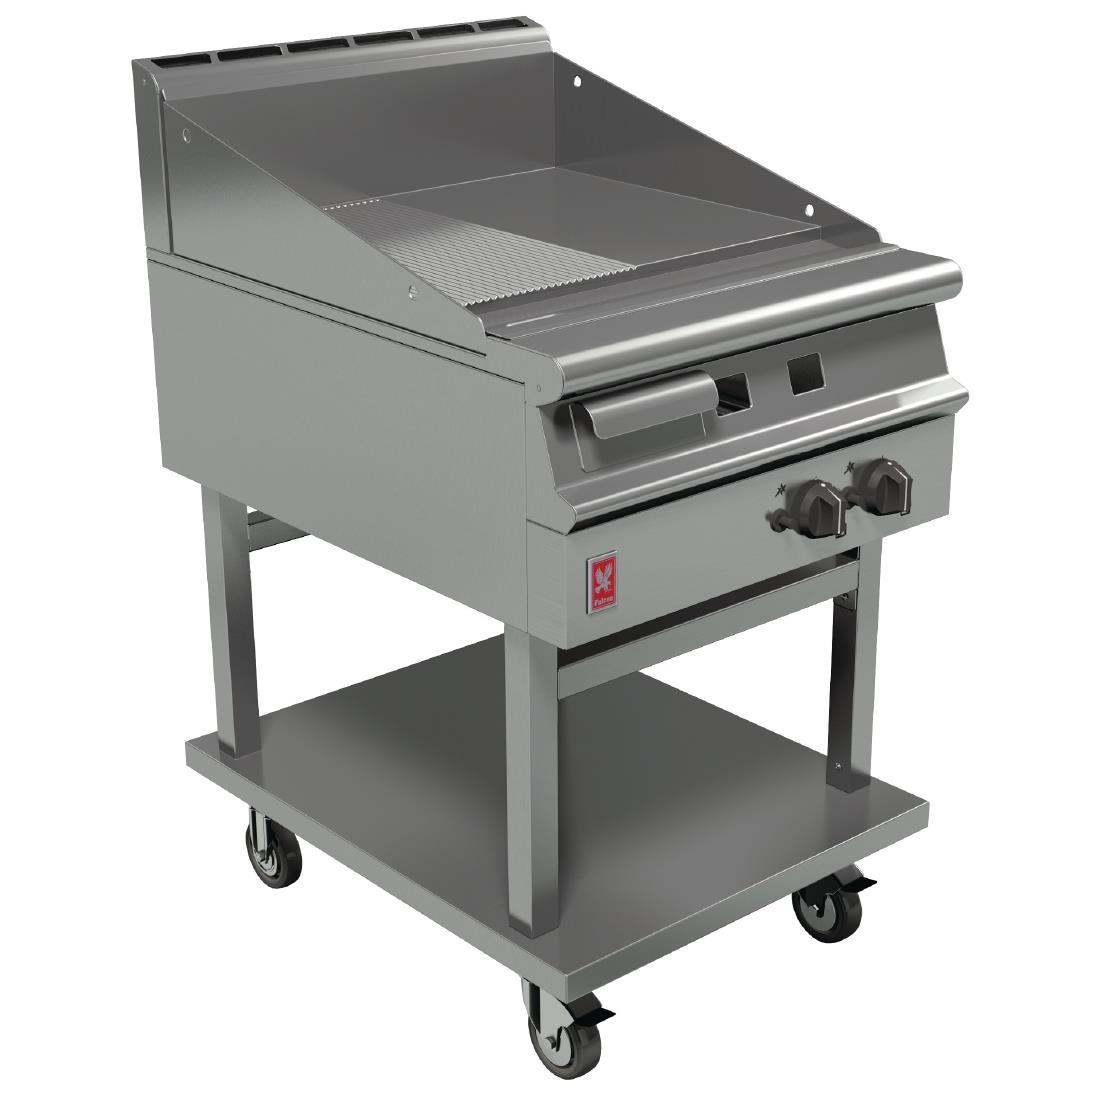 Falcon Dominator Plus 600mm Wide Half Ribbed LPG Griddle on Mobile Stand G3641R - GP046-P  - 1